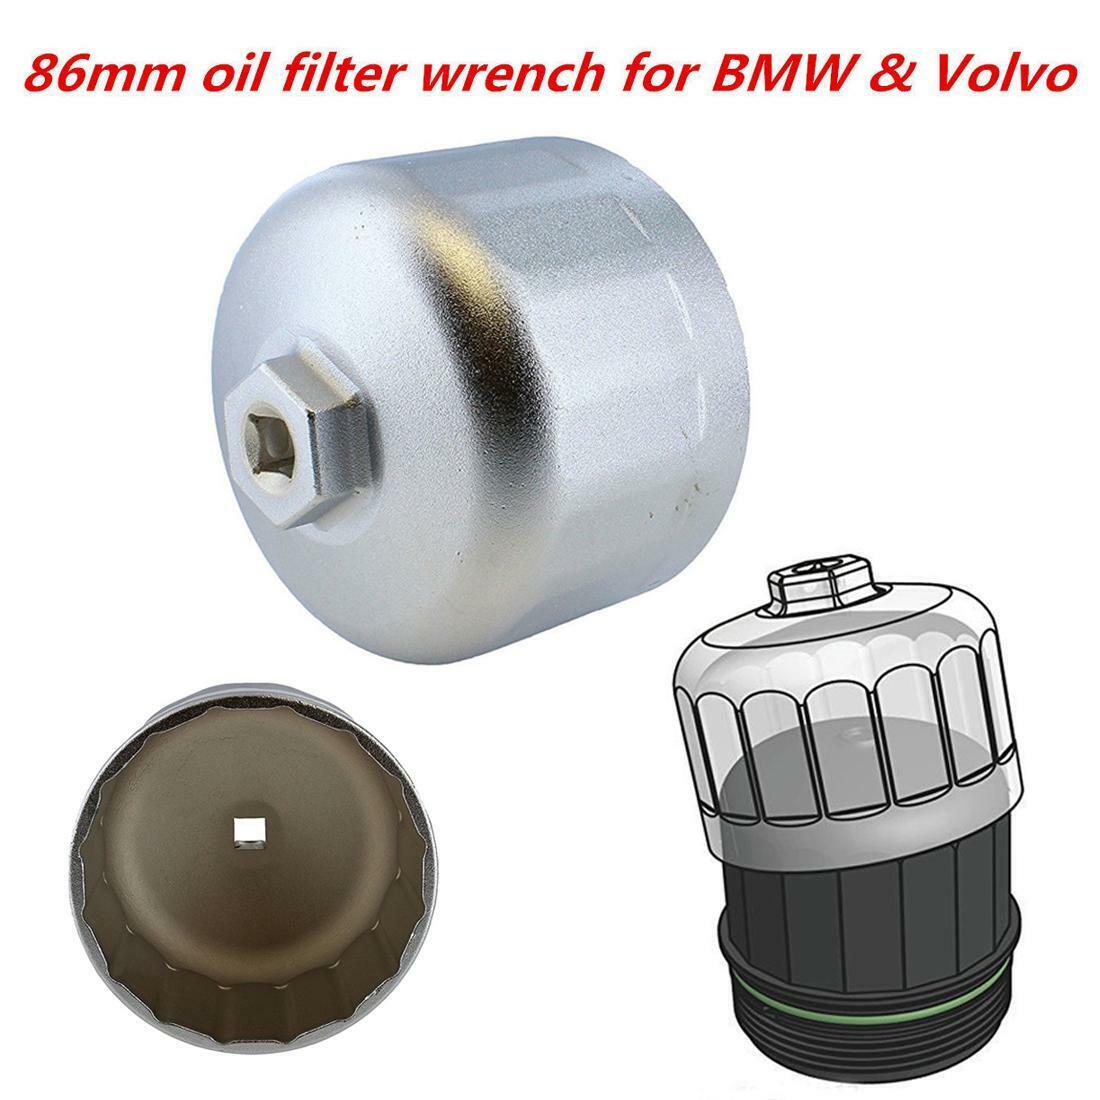 86mm 16 Flute Oil Filter Wrench Tool Cartridge Housing Cap For BMW Volvo Vehicle